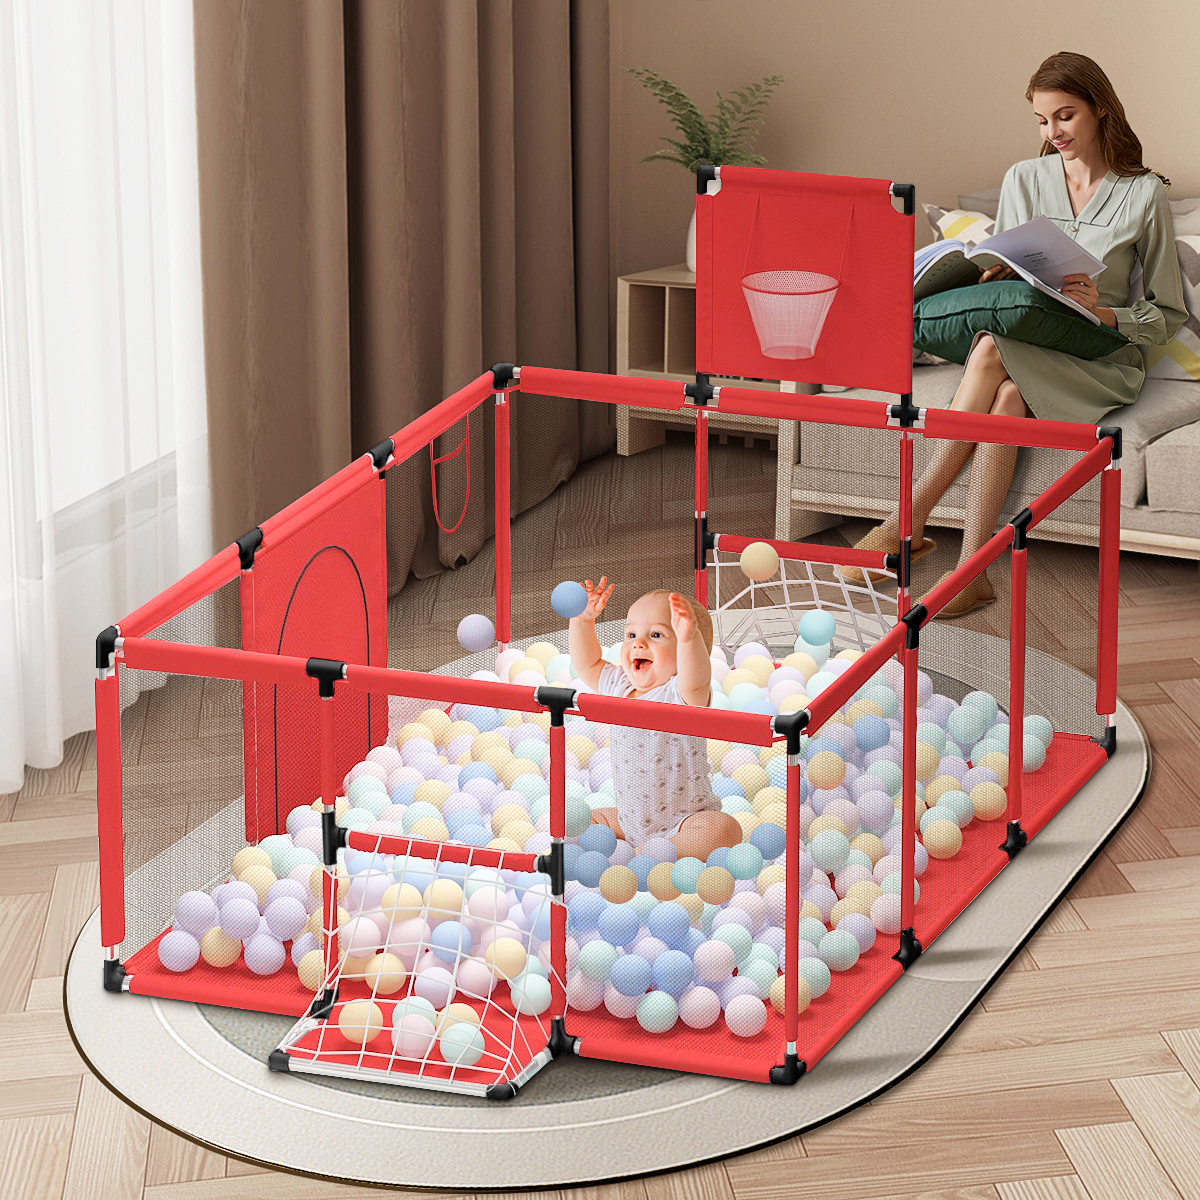 Baby-Playpen-Oxford-Cloth-Children-Infant-Fence-Safety-Barriers-Children-Ball-Pool-Baby-Playground-G-1935212-3